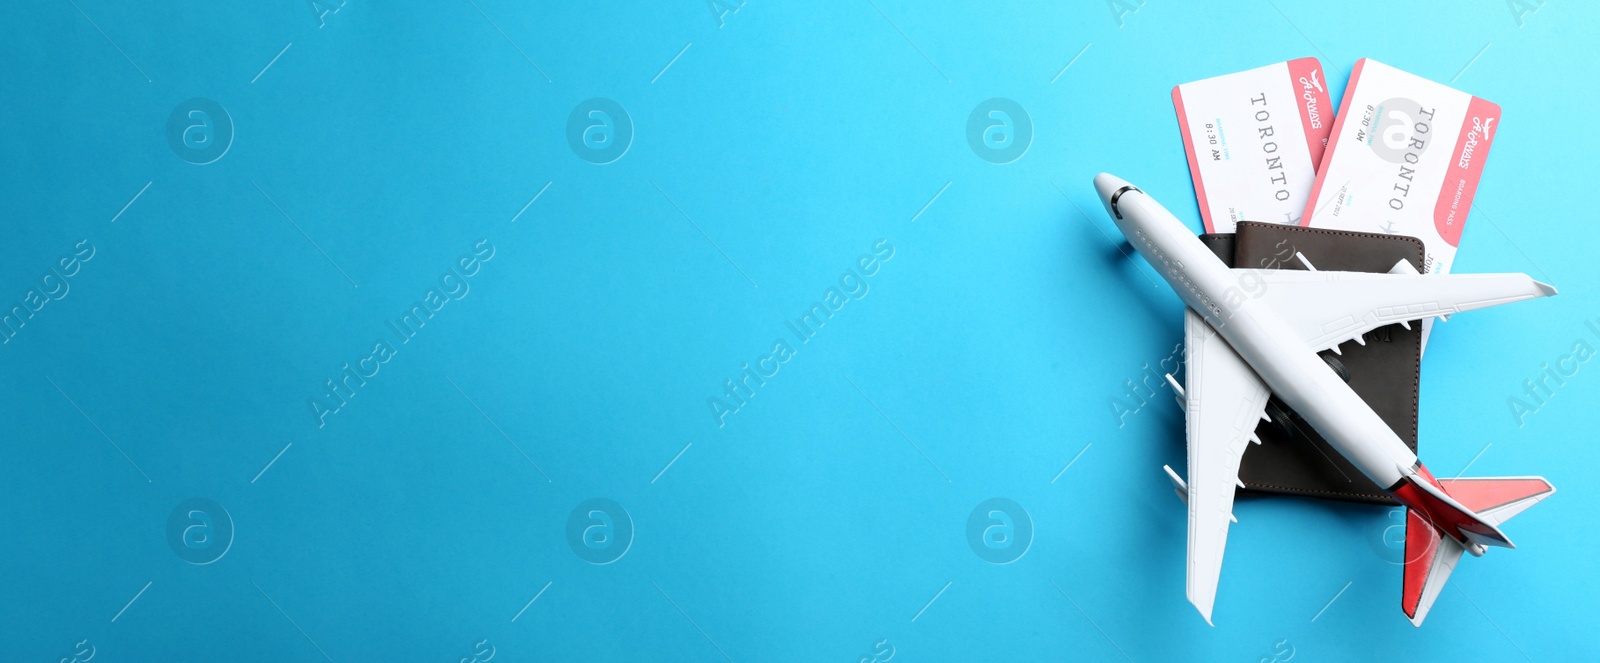 Photo of Toy airplane and passports with tickets on light blue background, flat lay. Space for text